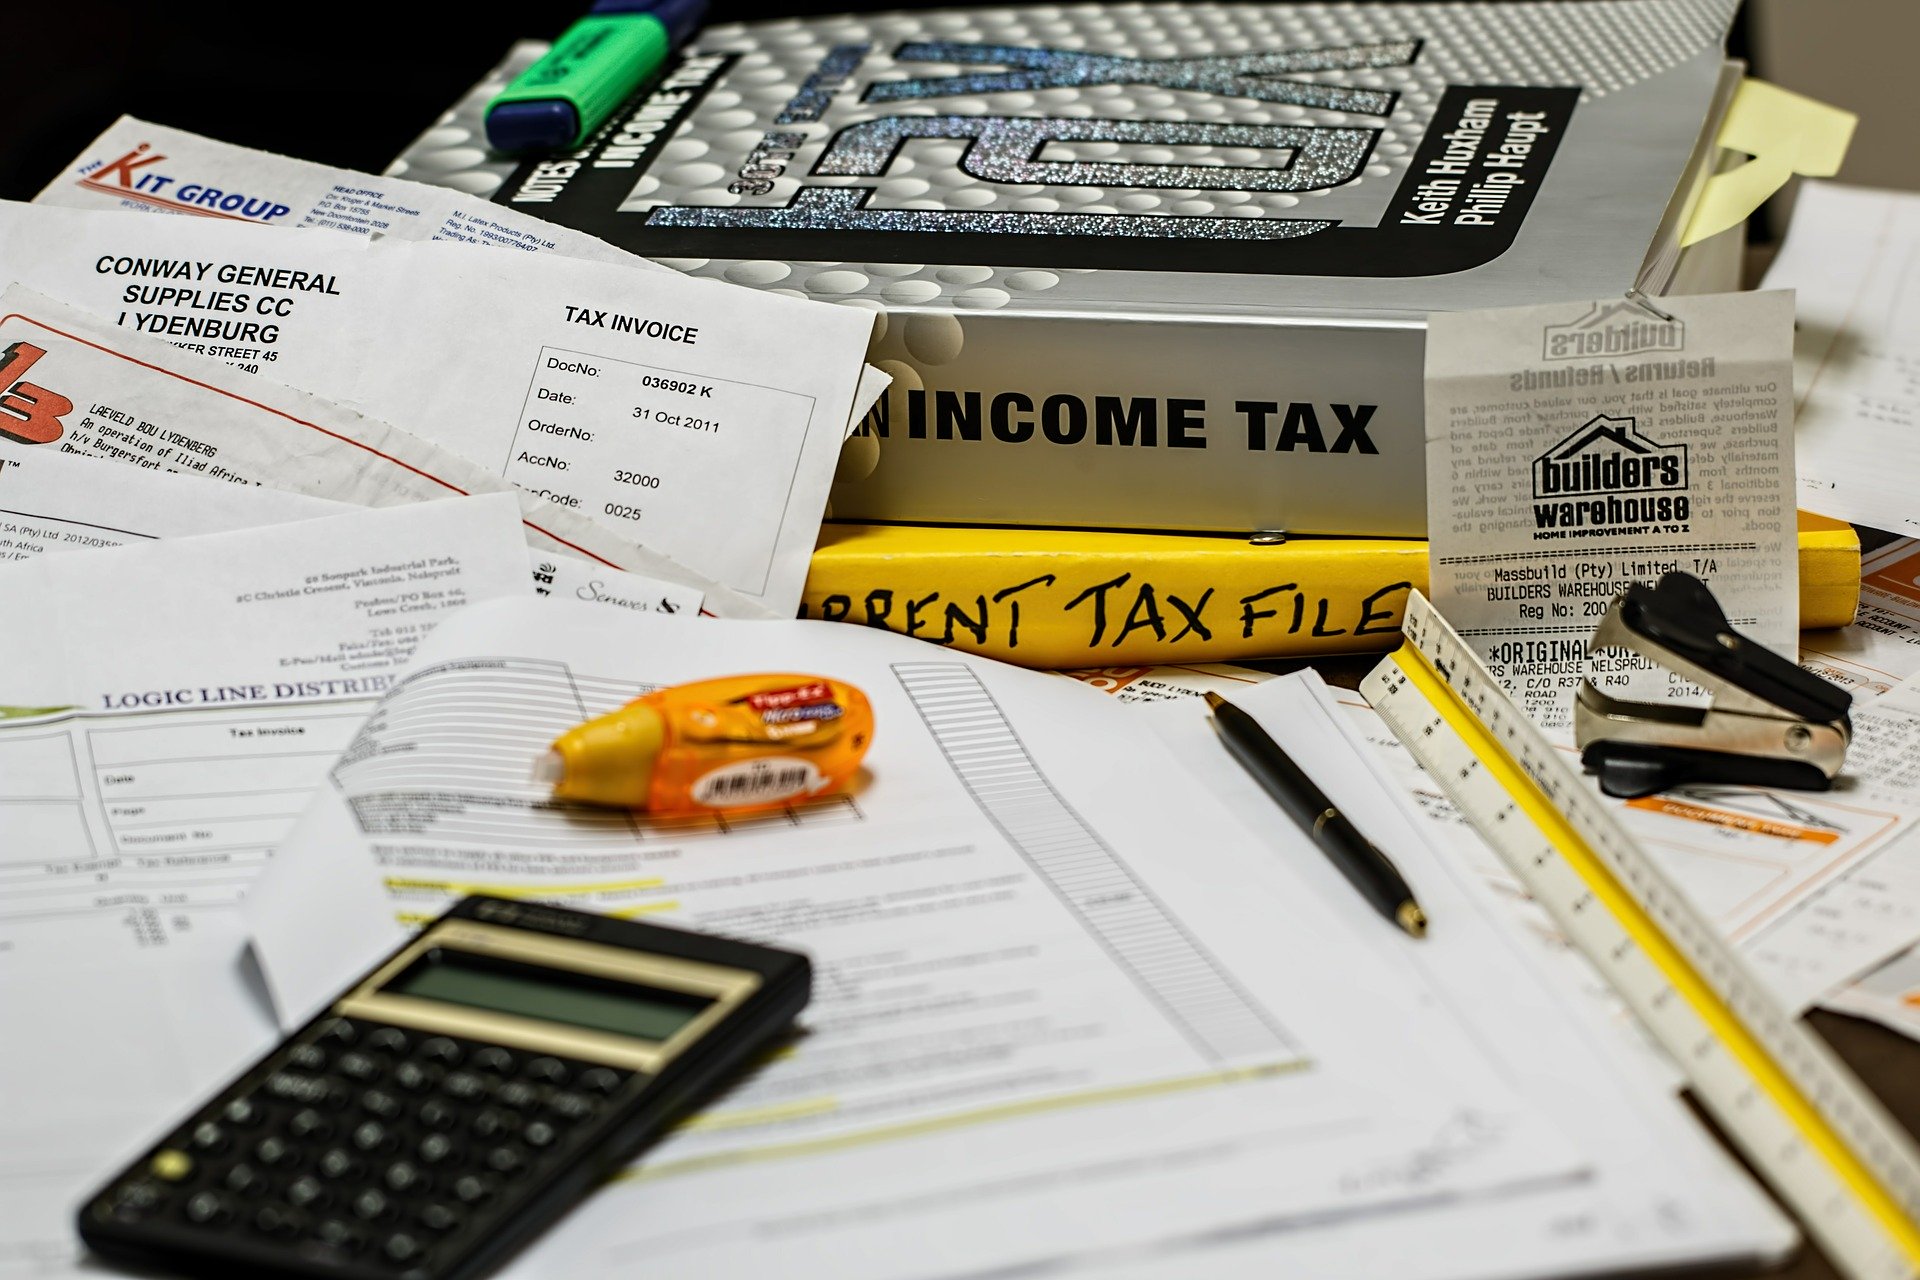 How Are You Going to Pay Your Tax Bill? What to Do When You Don’t Have the Cash